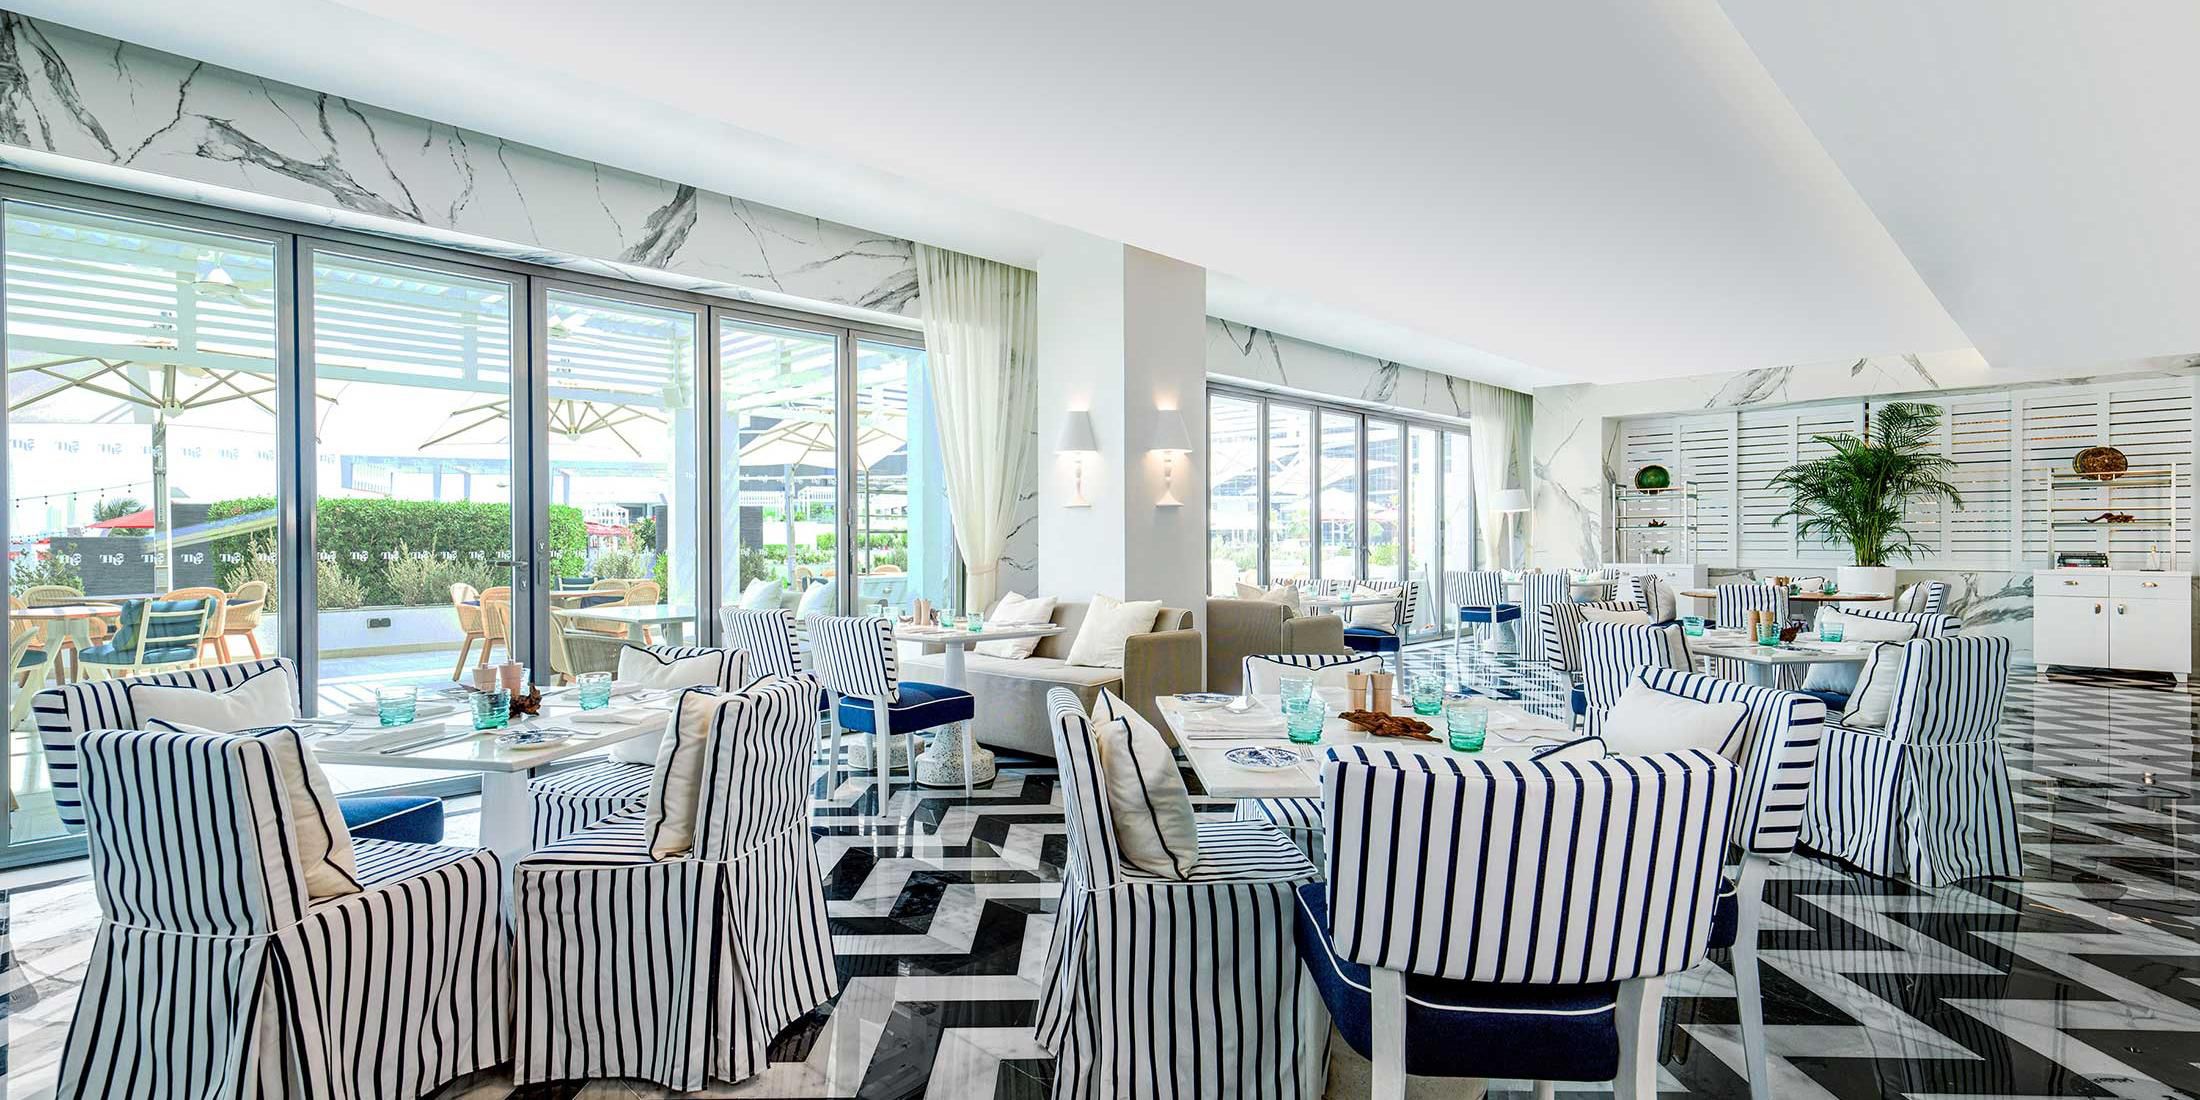 Dine at our signature restaurant, Envy, offering a signature mouth watering international menu plus locally inspired dishes. Enjoy panoramic views and a refreshing ocean breeze from our elevated balcony for a truly unforgettable dining experience. 